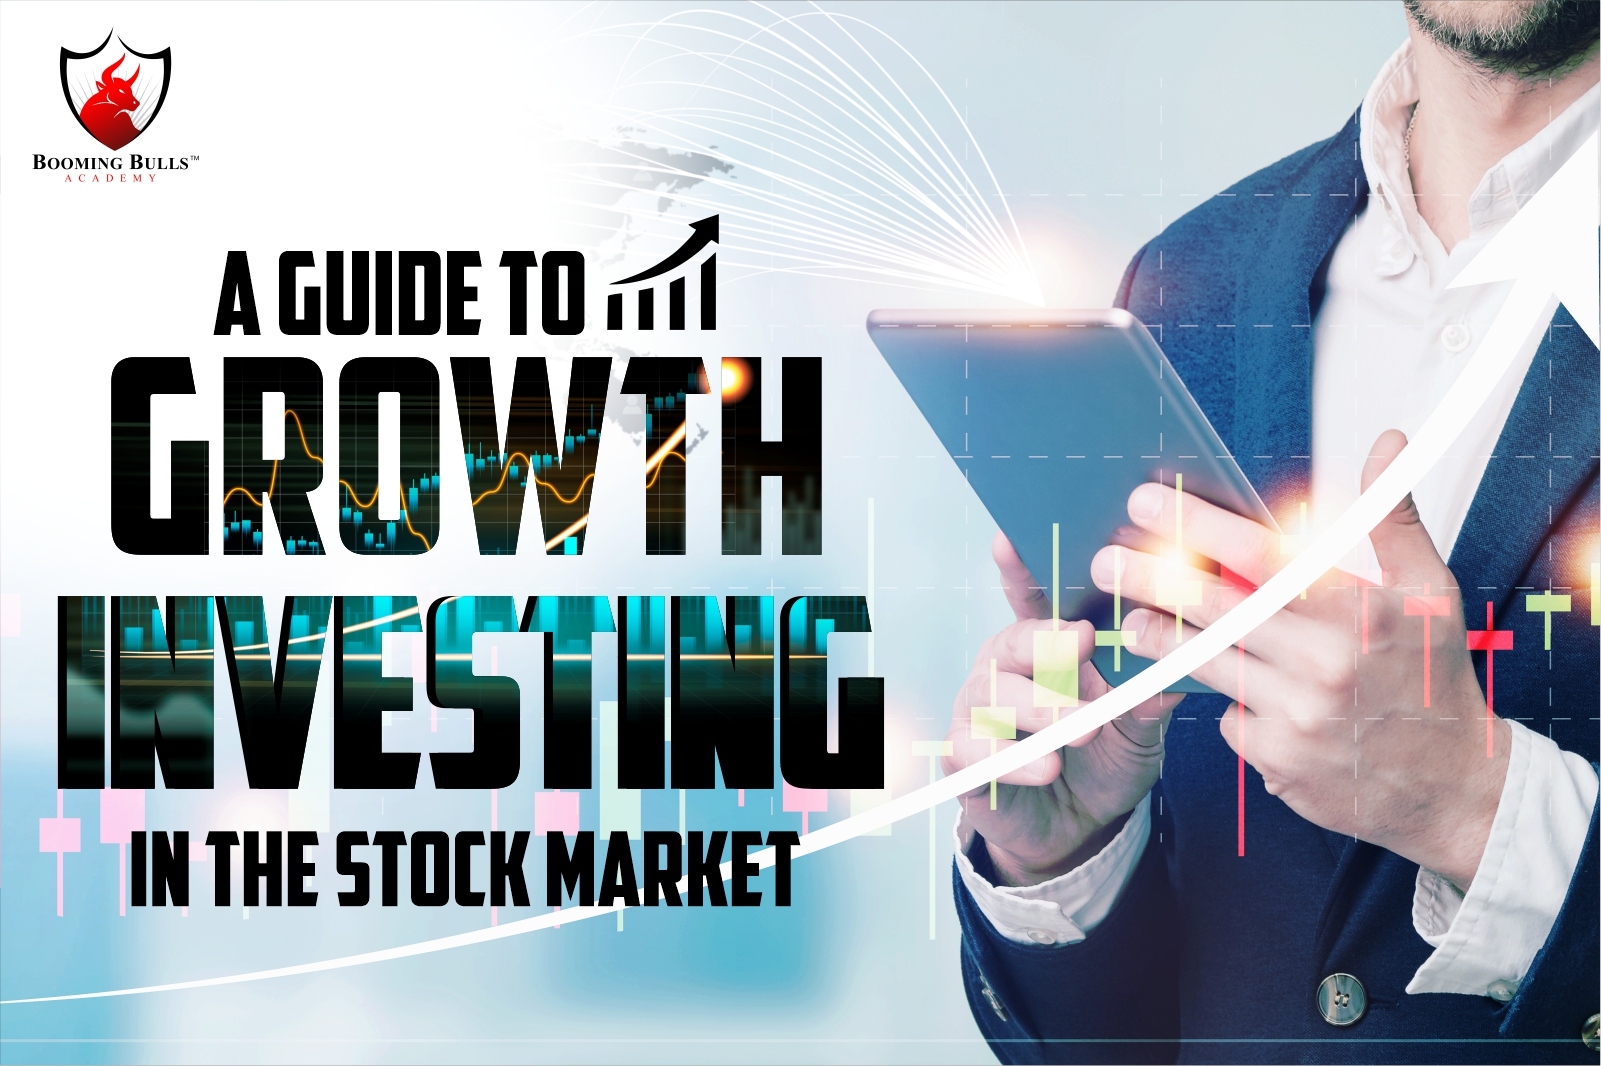 A Guide to Growth Investing in the Stock Market